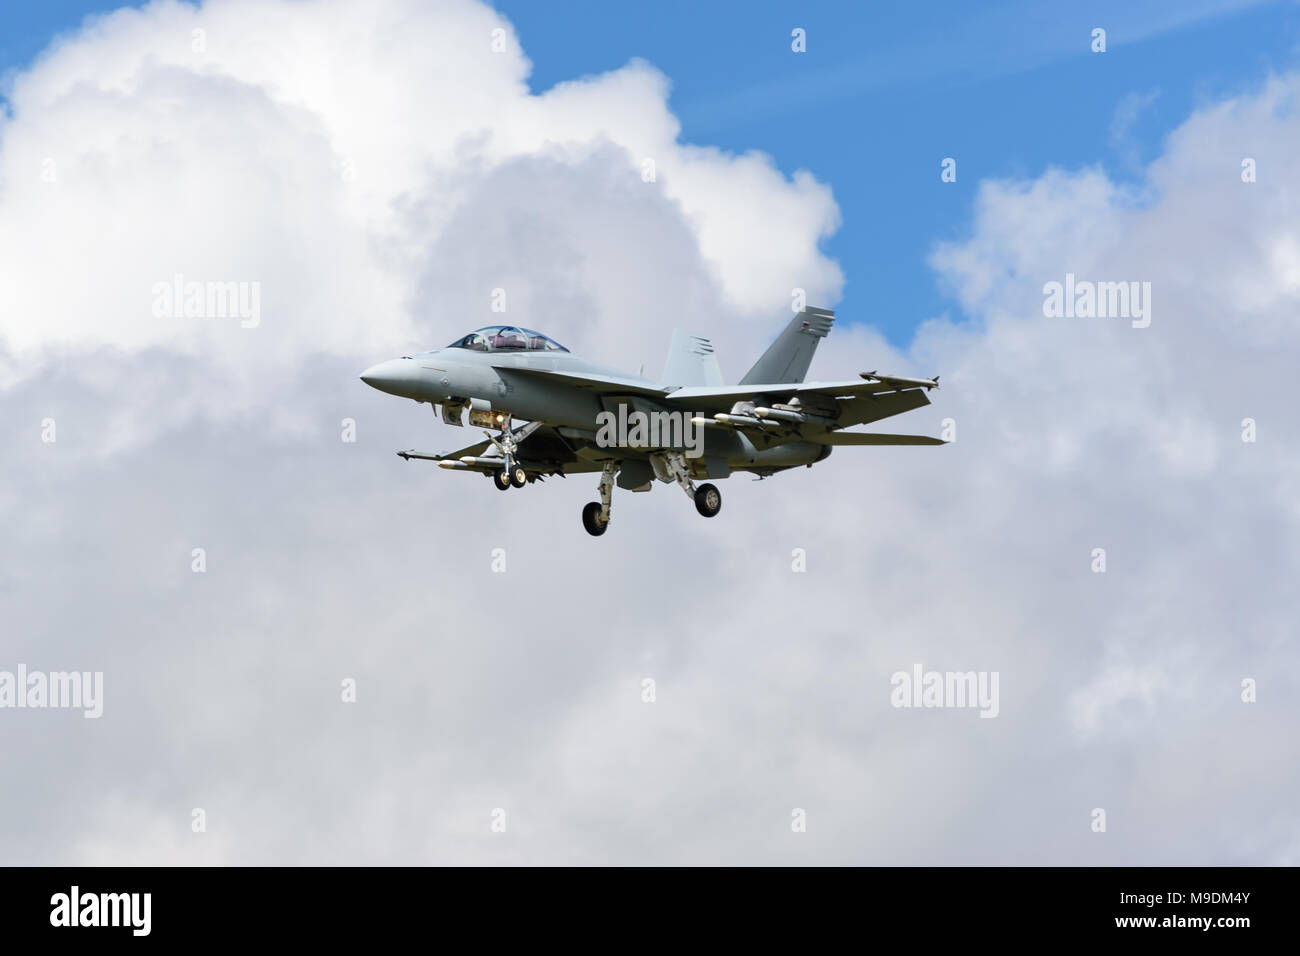 Farnborough Airshow 2016: an F-18 comes in to land Stock Photo